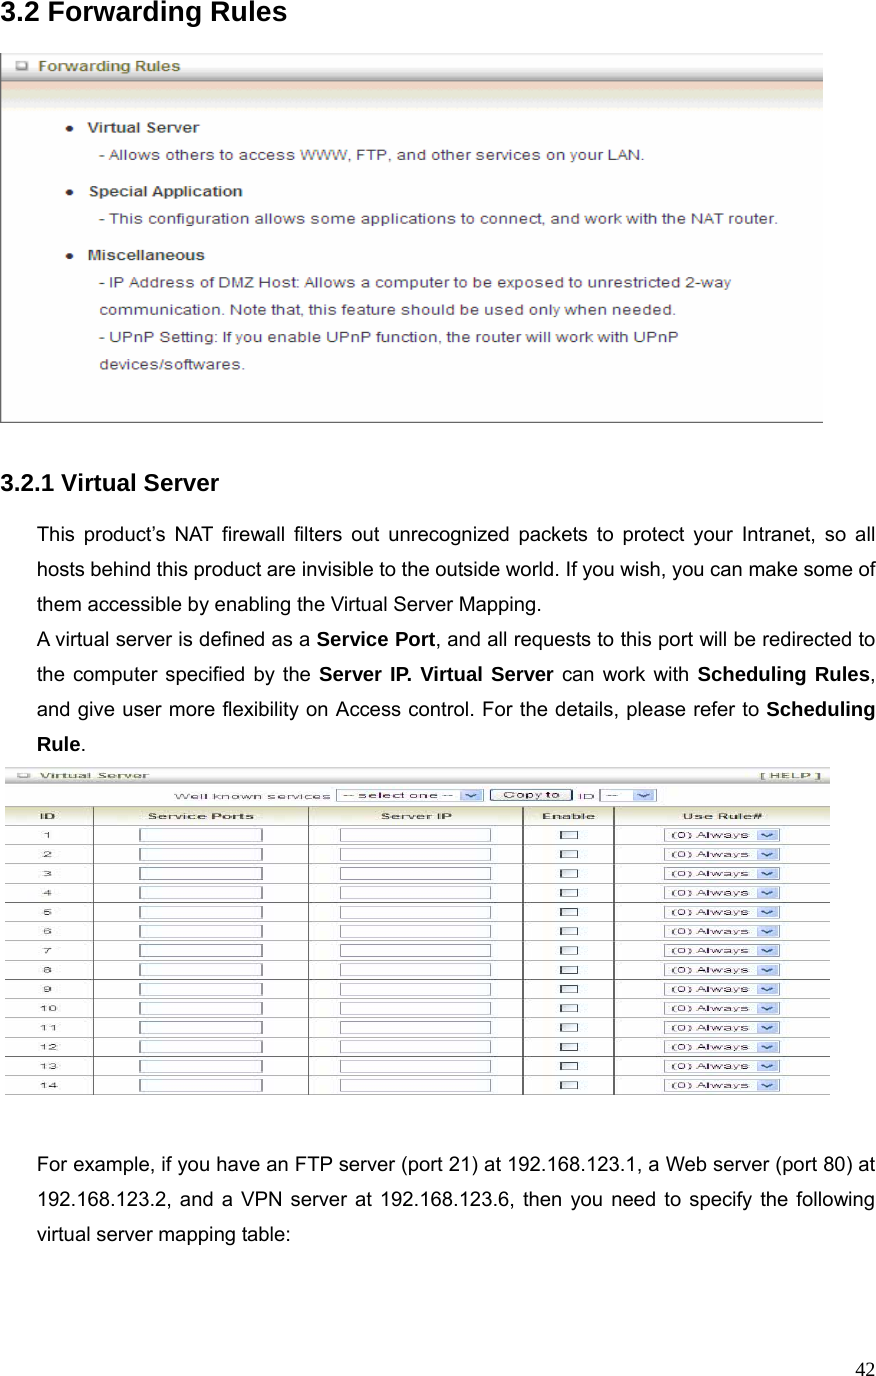  423.2 Forwarding Rules     3.2.1 Virtual Server  This product’s NAT firewall filters out unrecognized packets to protect your Intranet, so all hosts behind this product are invisible to the outside world. If you wish, you can make some of them accessible by enabling the Virtual Server Mapping. A virtual server is defined as a Service Port, and all requests to this port will be redirected to the computer specified by the Server IP. Virtual Server can work with Scheduling Rules, and give user more flexibility on Access control. For the details, please refer to Scheduling Rule.    For example, if you have an FTP server (port 21) at 192.168.123.1, a Web server (port 80) at 192.168.123.2, and a VPN server at 192.168.123.6, then you need to specify the following virtual server mapping table:   